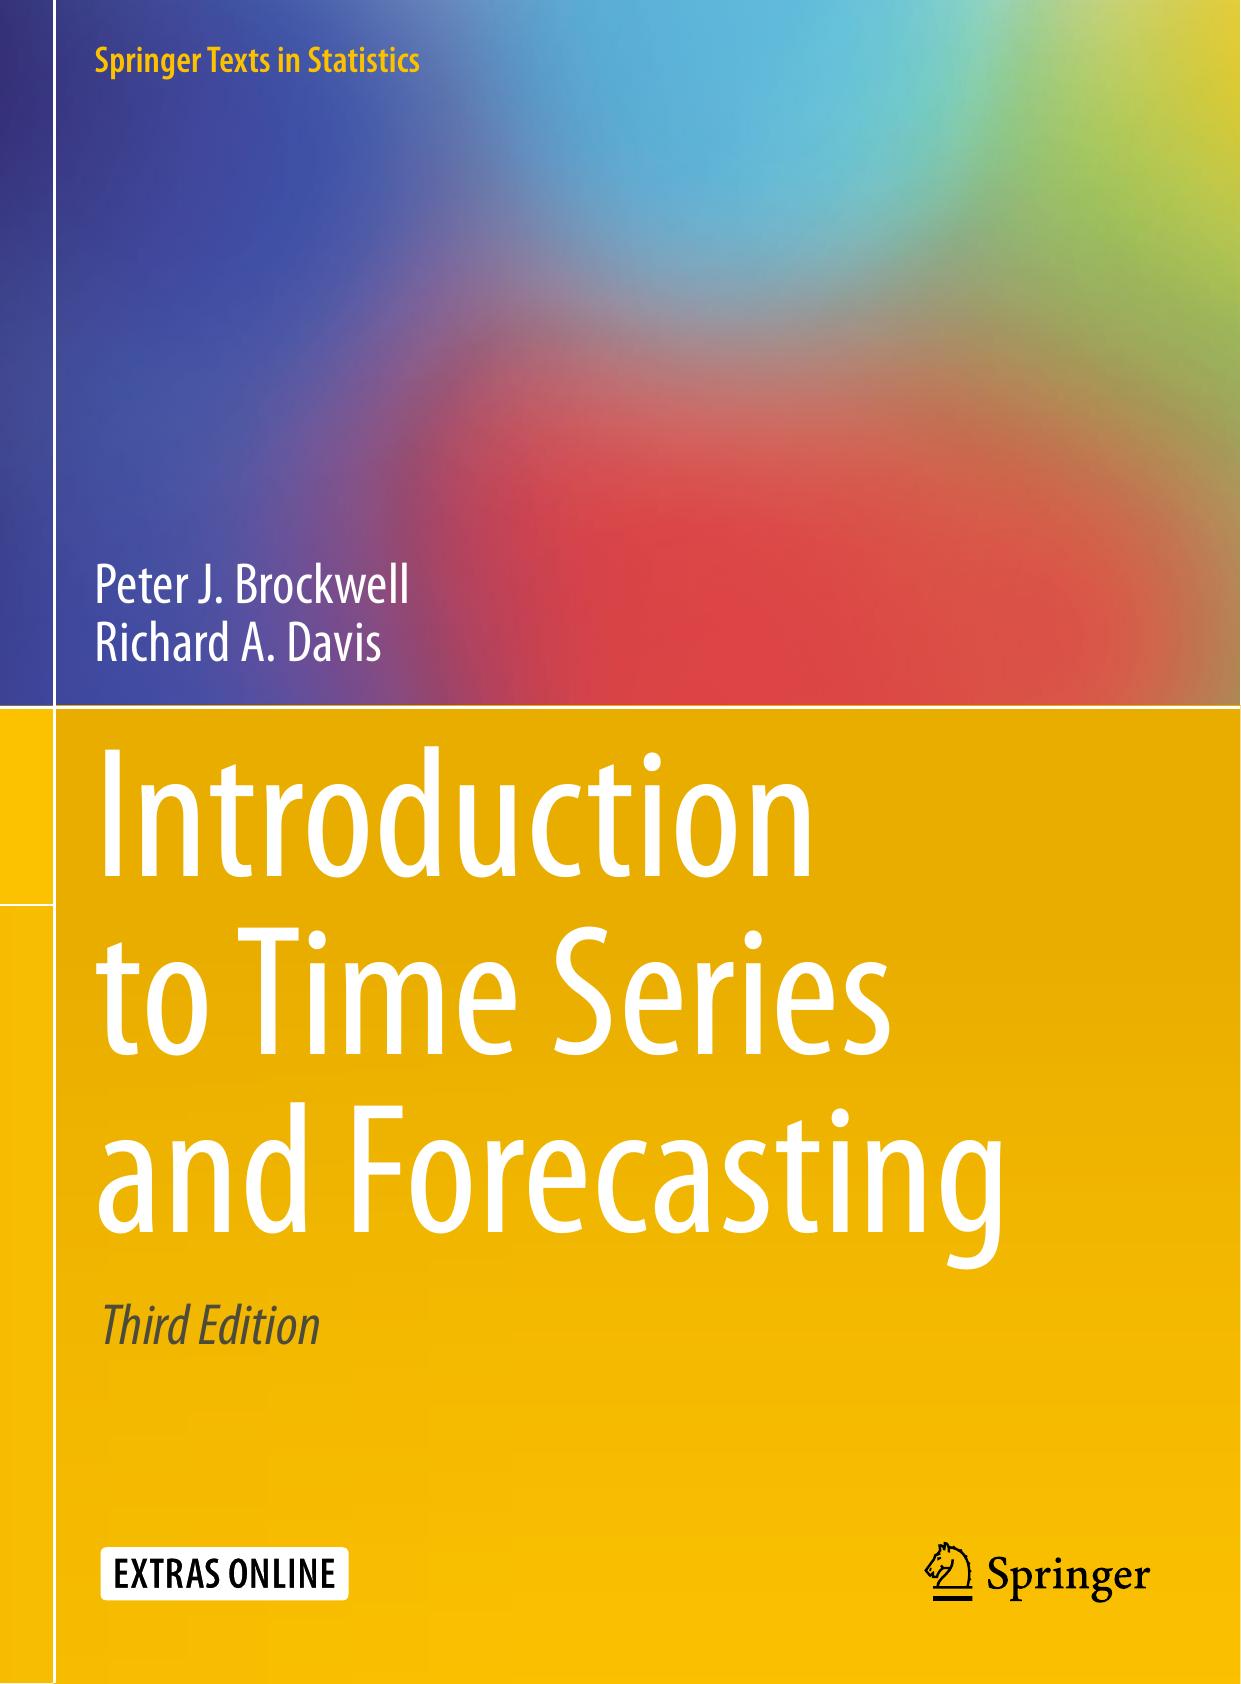 Introduction to Time Series and Forecasting by Peter J. Brockwell & Richard A. Davis